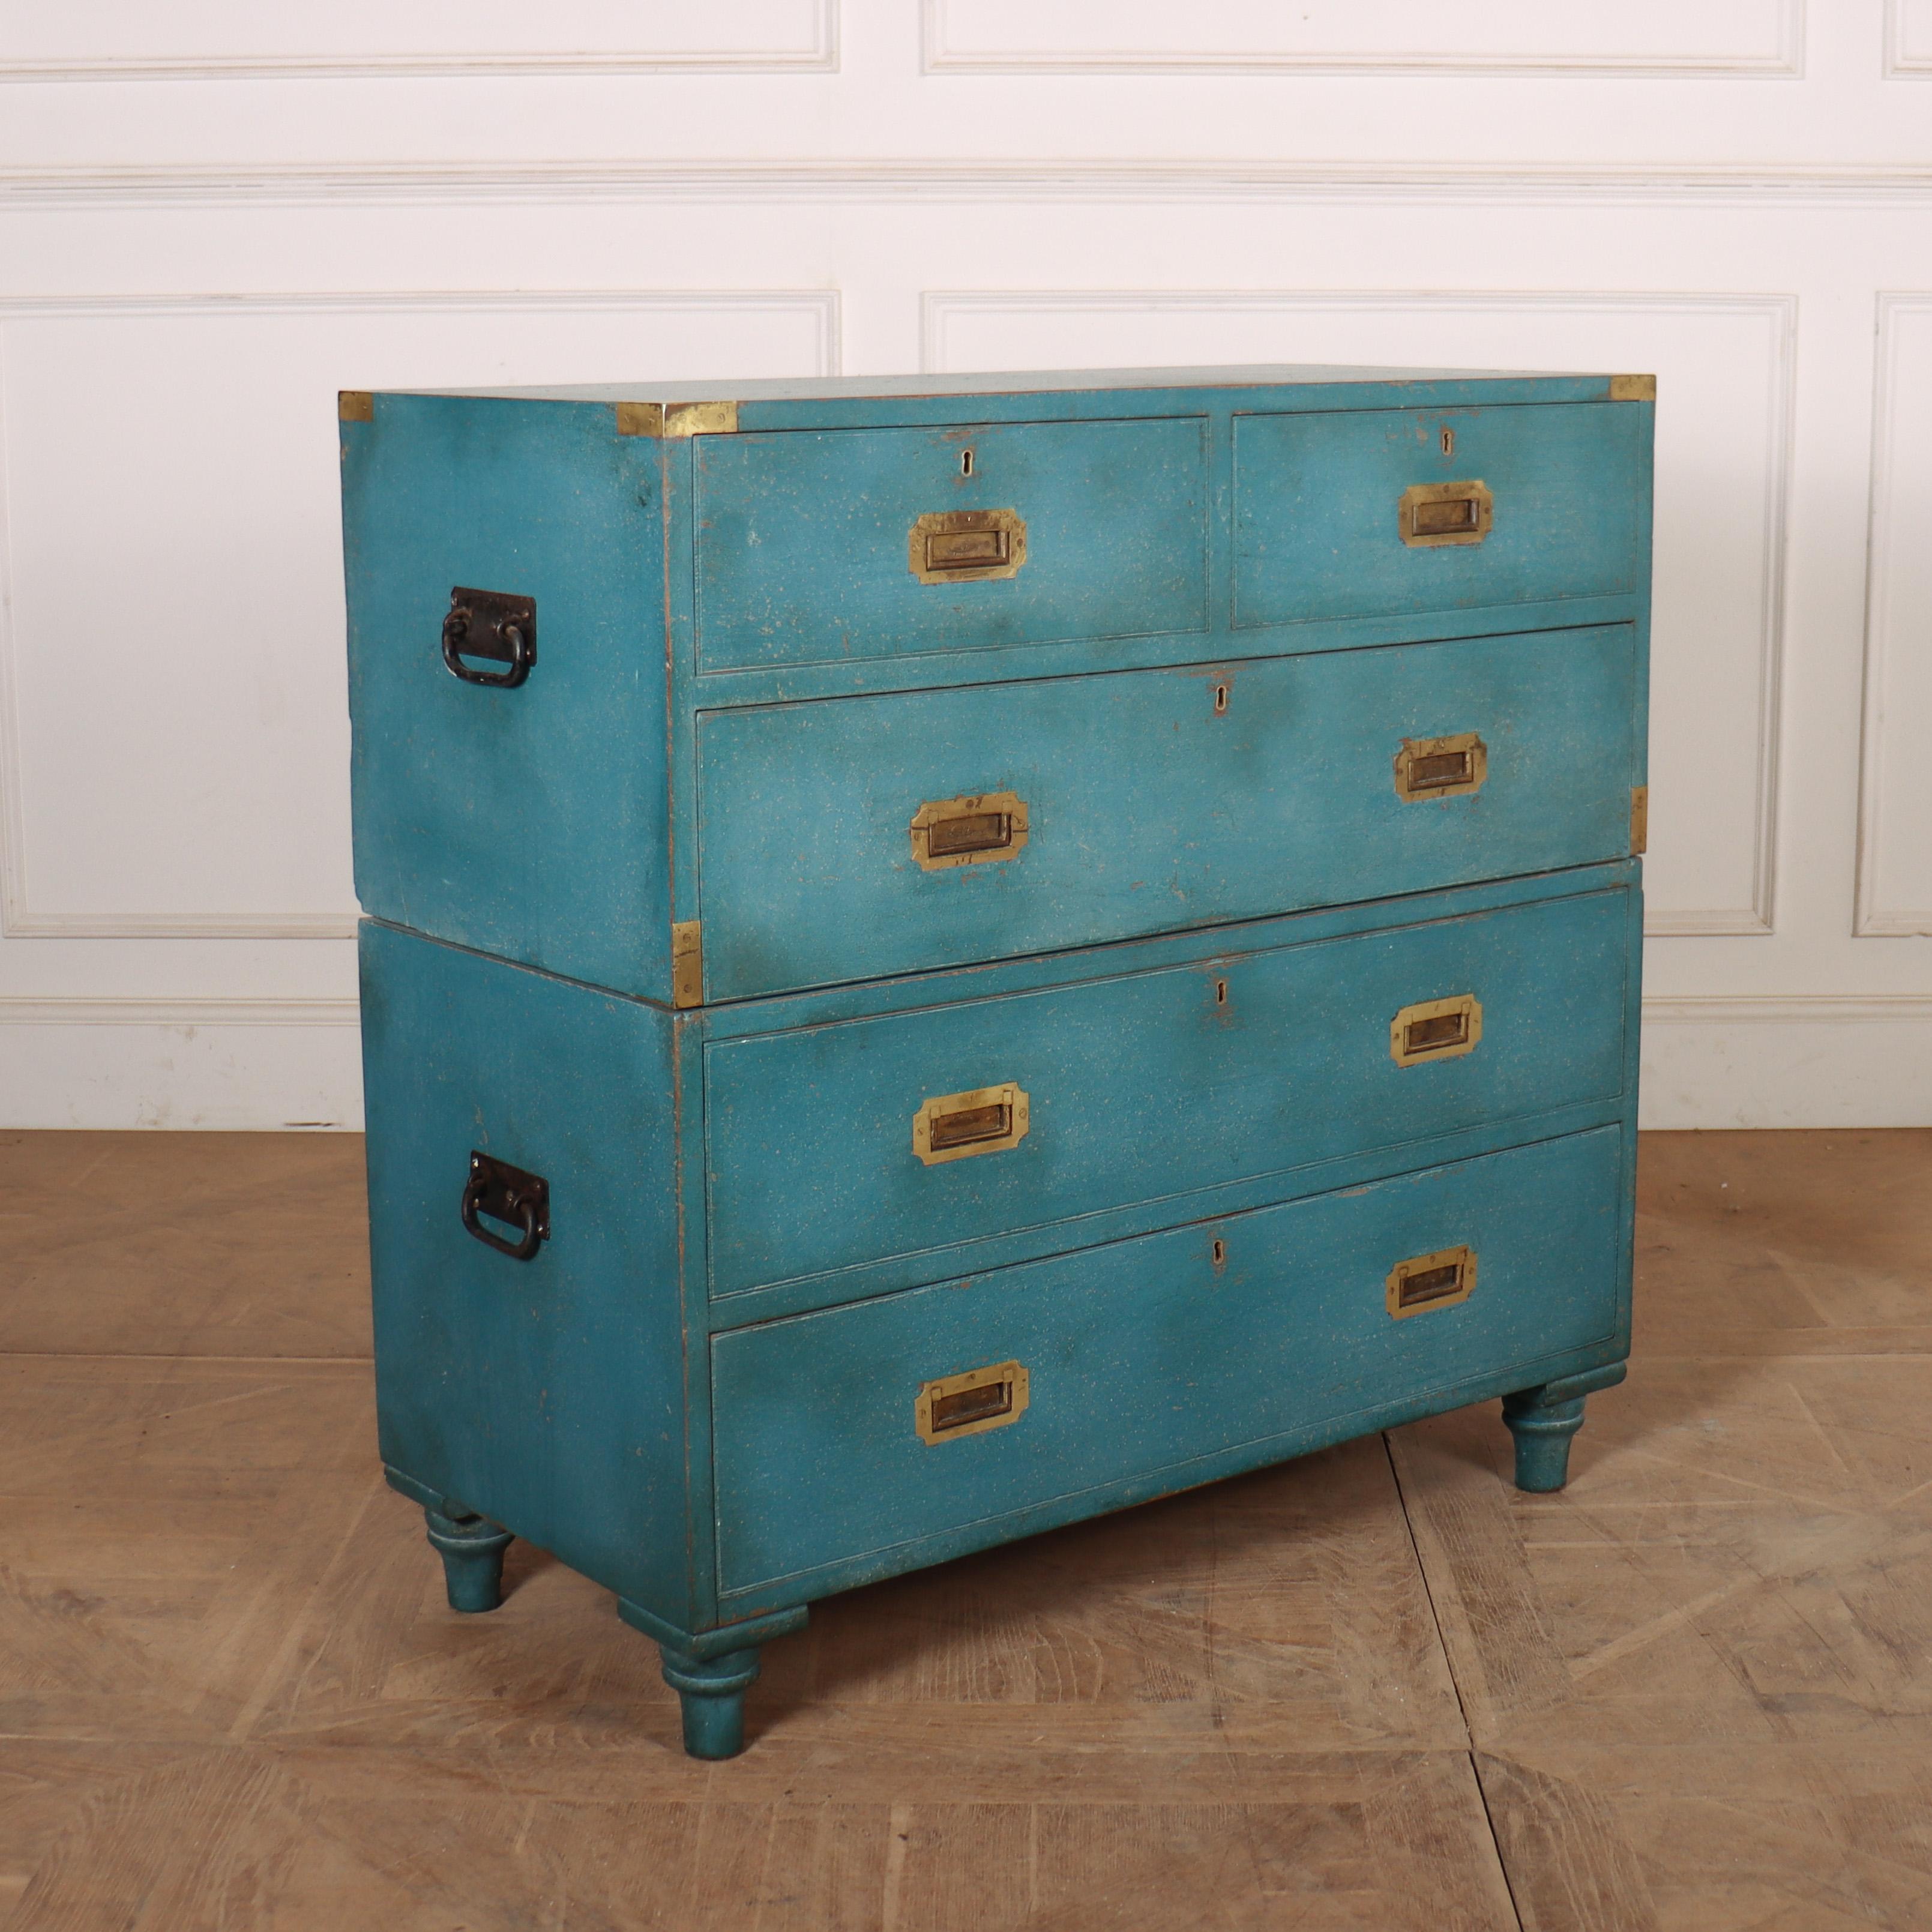 19th C English military chest with later aged blue paint. 1840.

Reference: 8349

Dimensions
39 inches (99 cms) Wide
18.5 inches (47 cms) Deep
39 inches (99 cms) High